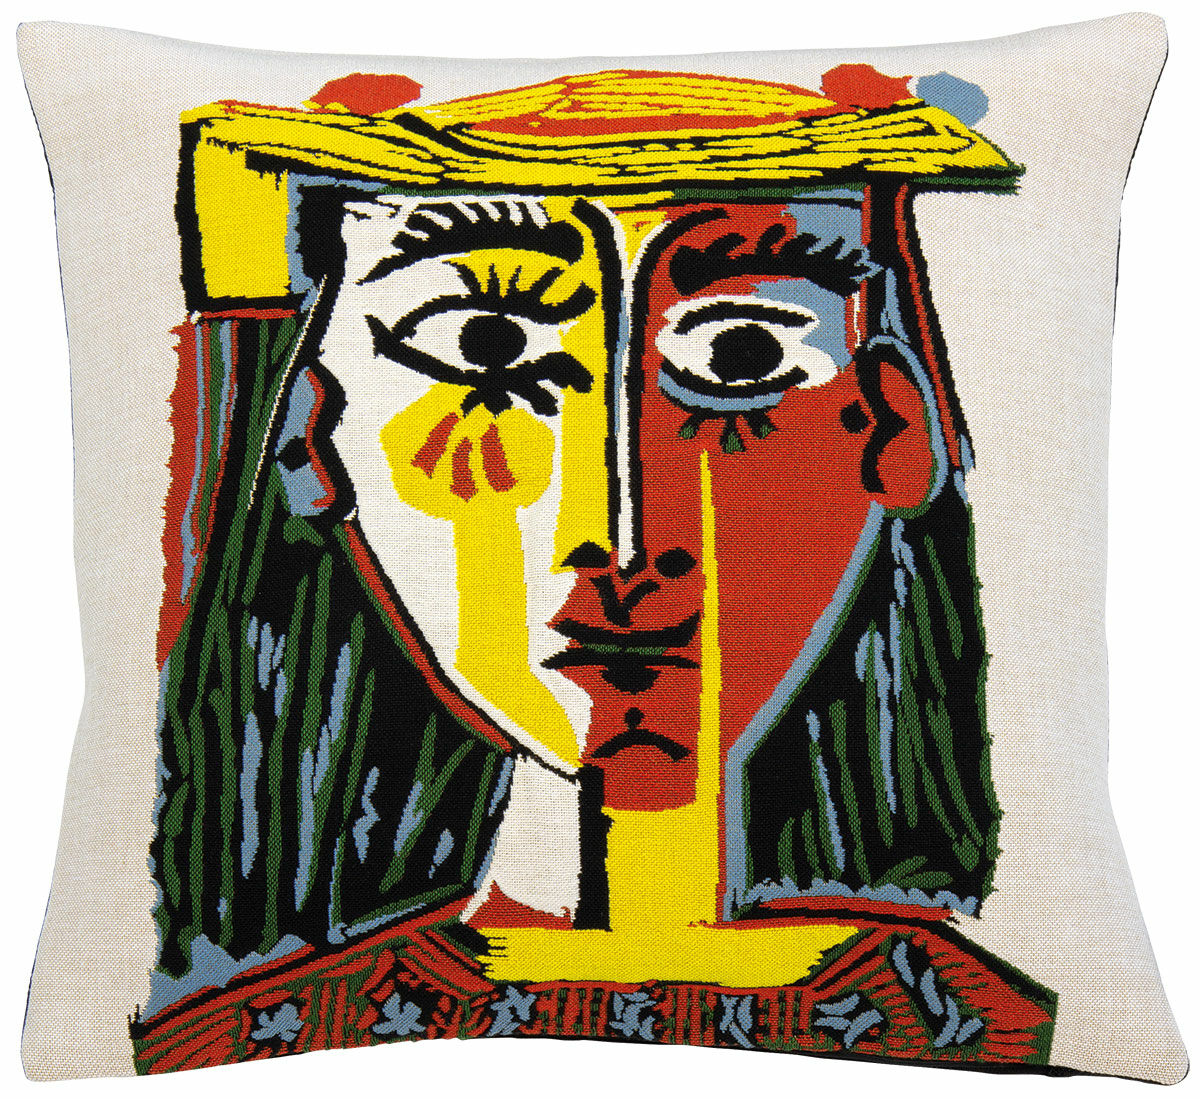 Cushion cover "Woman in a Hat with Pompoms and a Printed Blouse" (1962) by Pablo Picasso